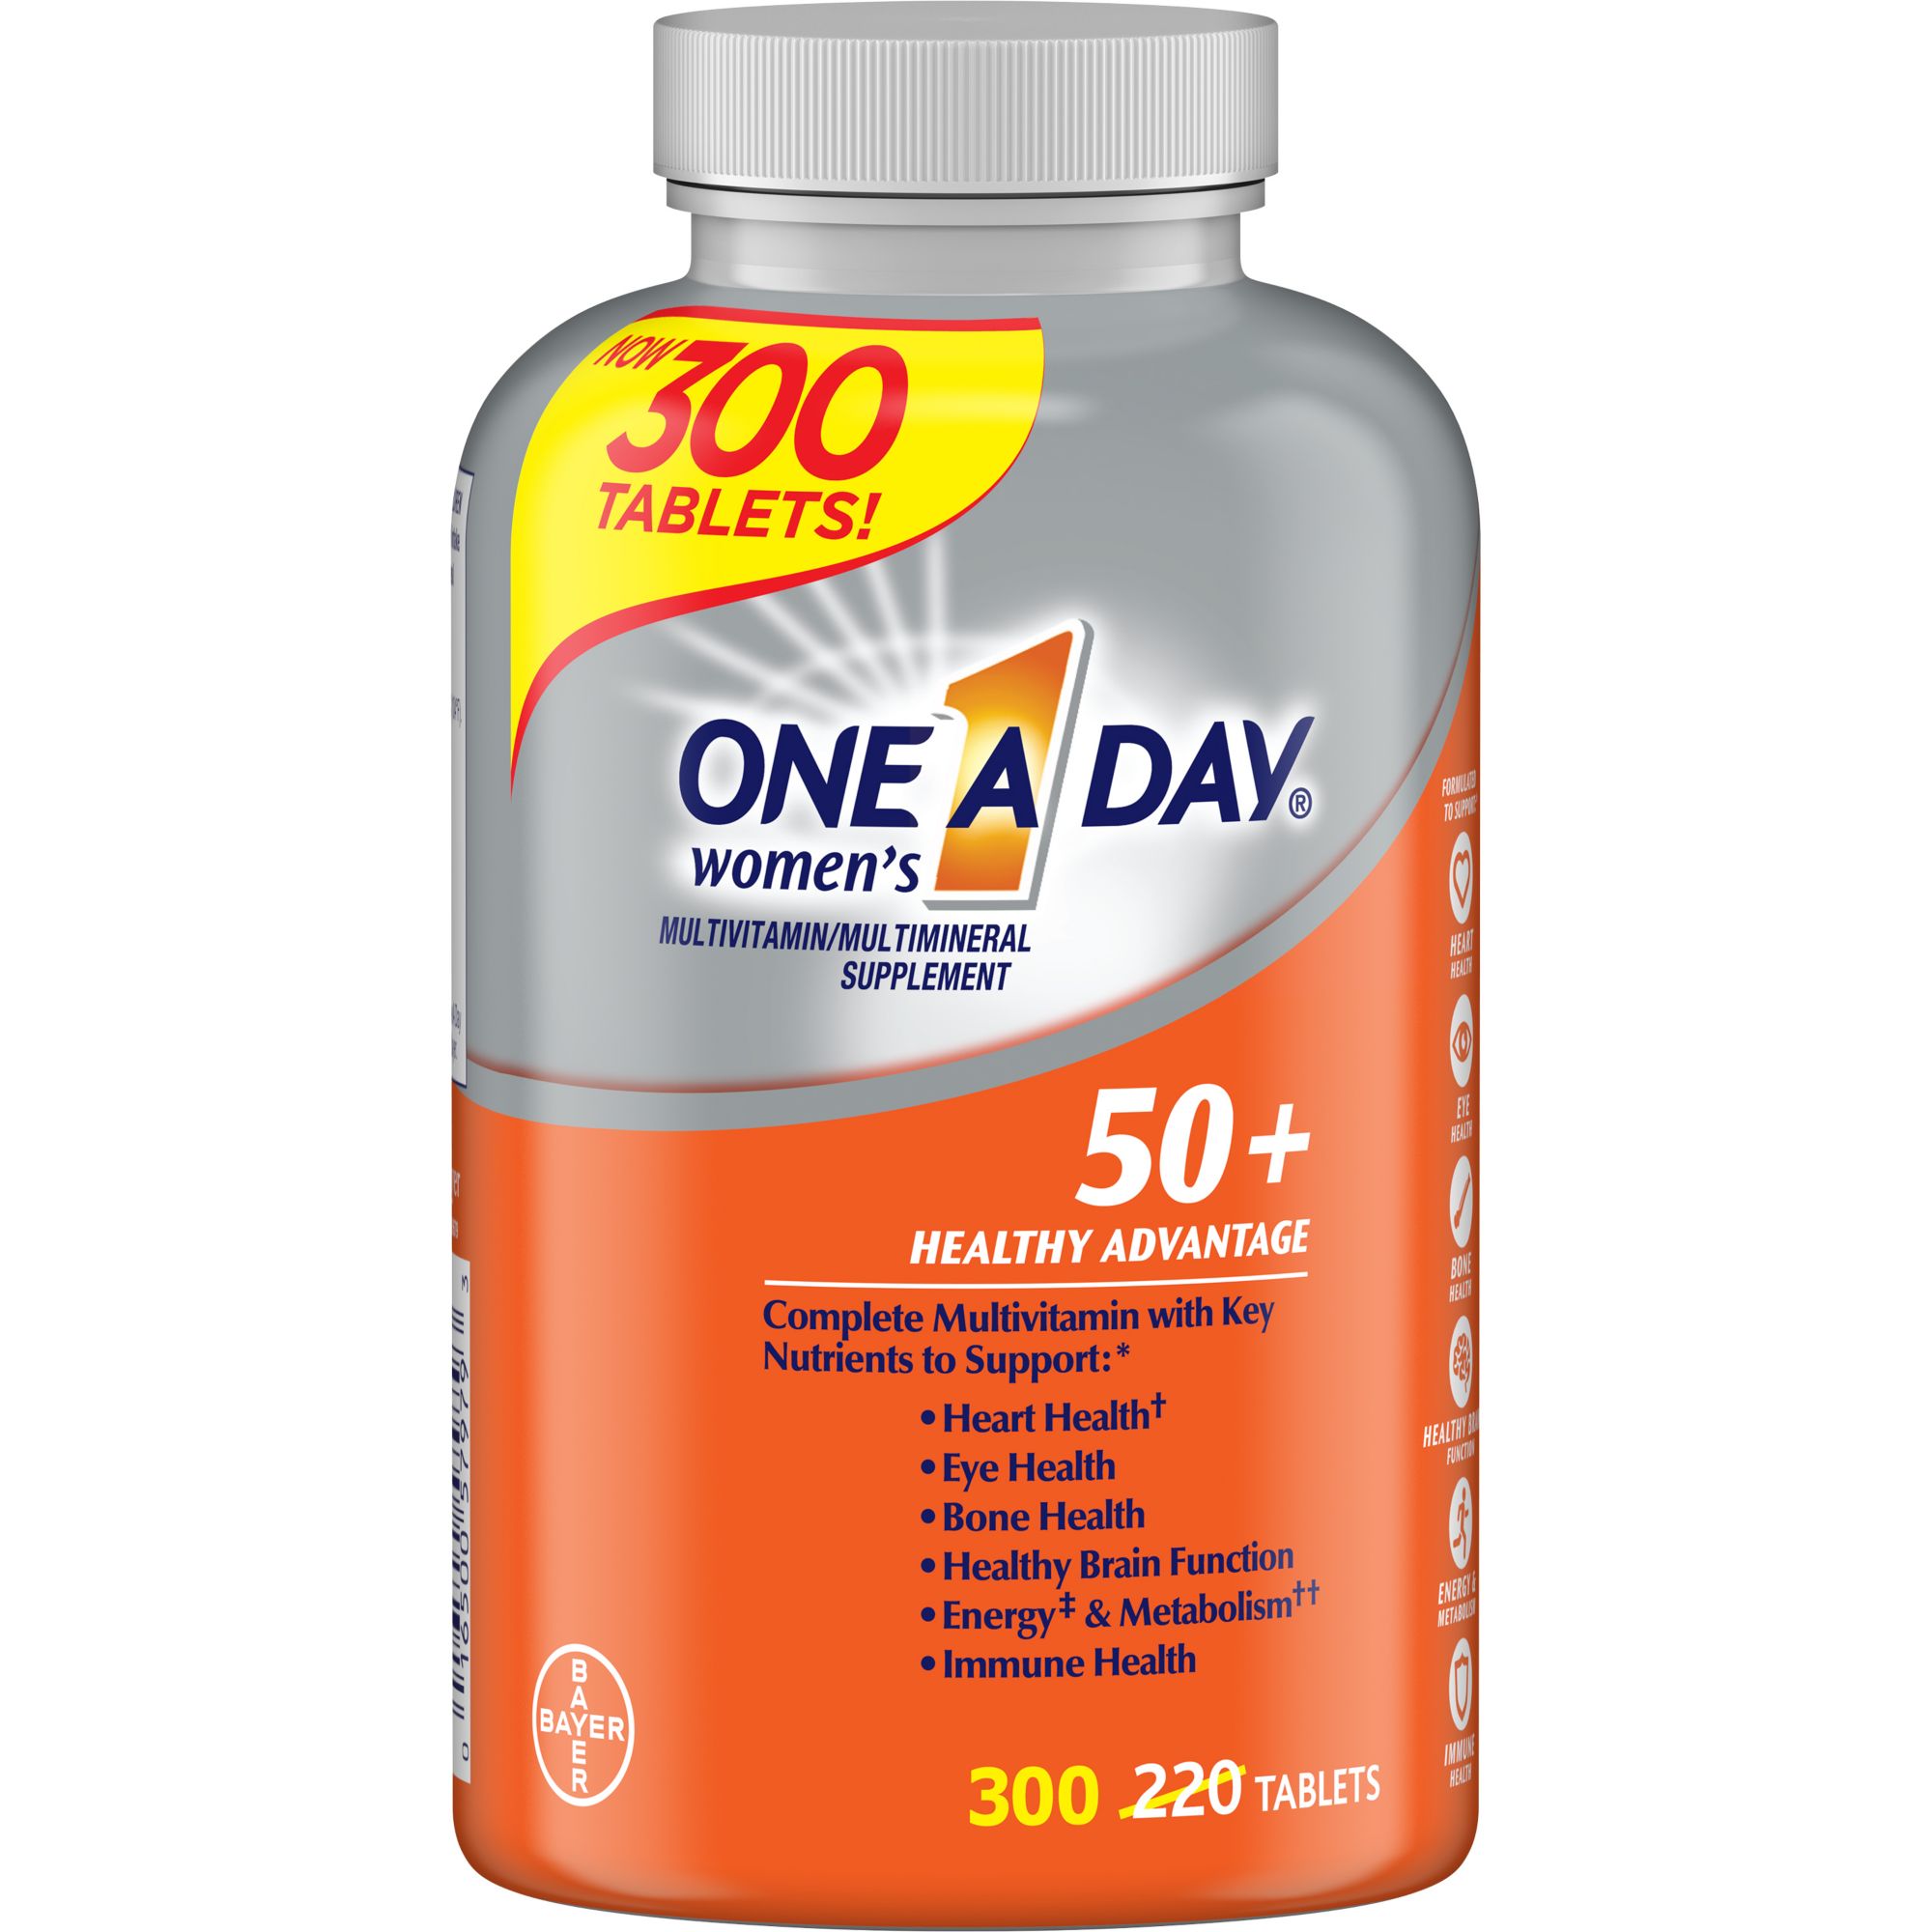 One A Day Women's Multivitamin and Multimineral Supplement, 300 ct.